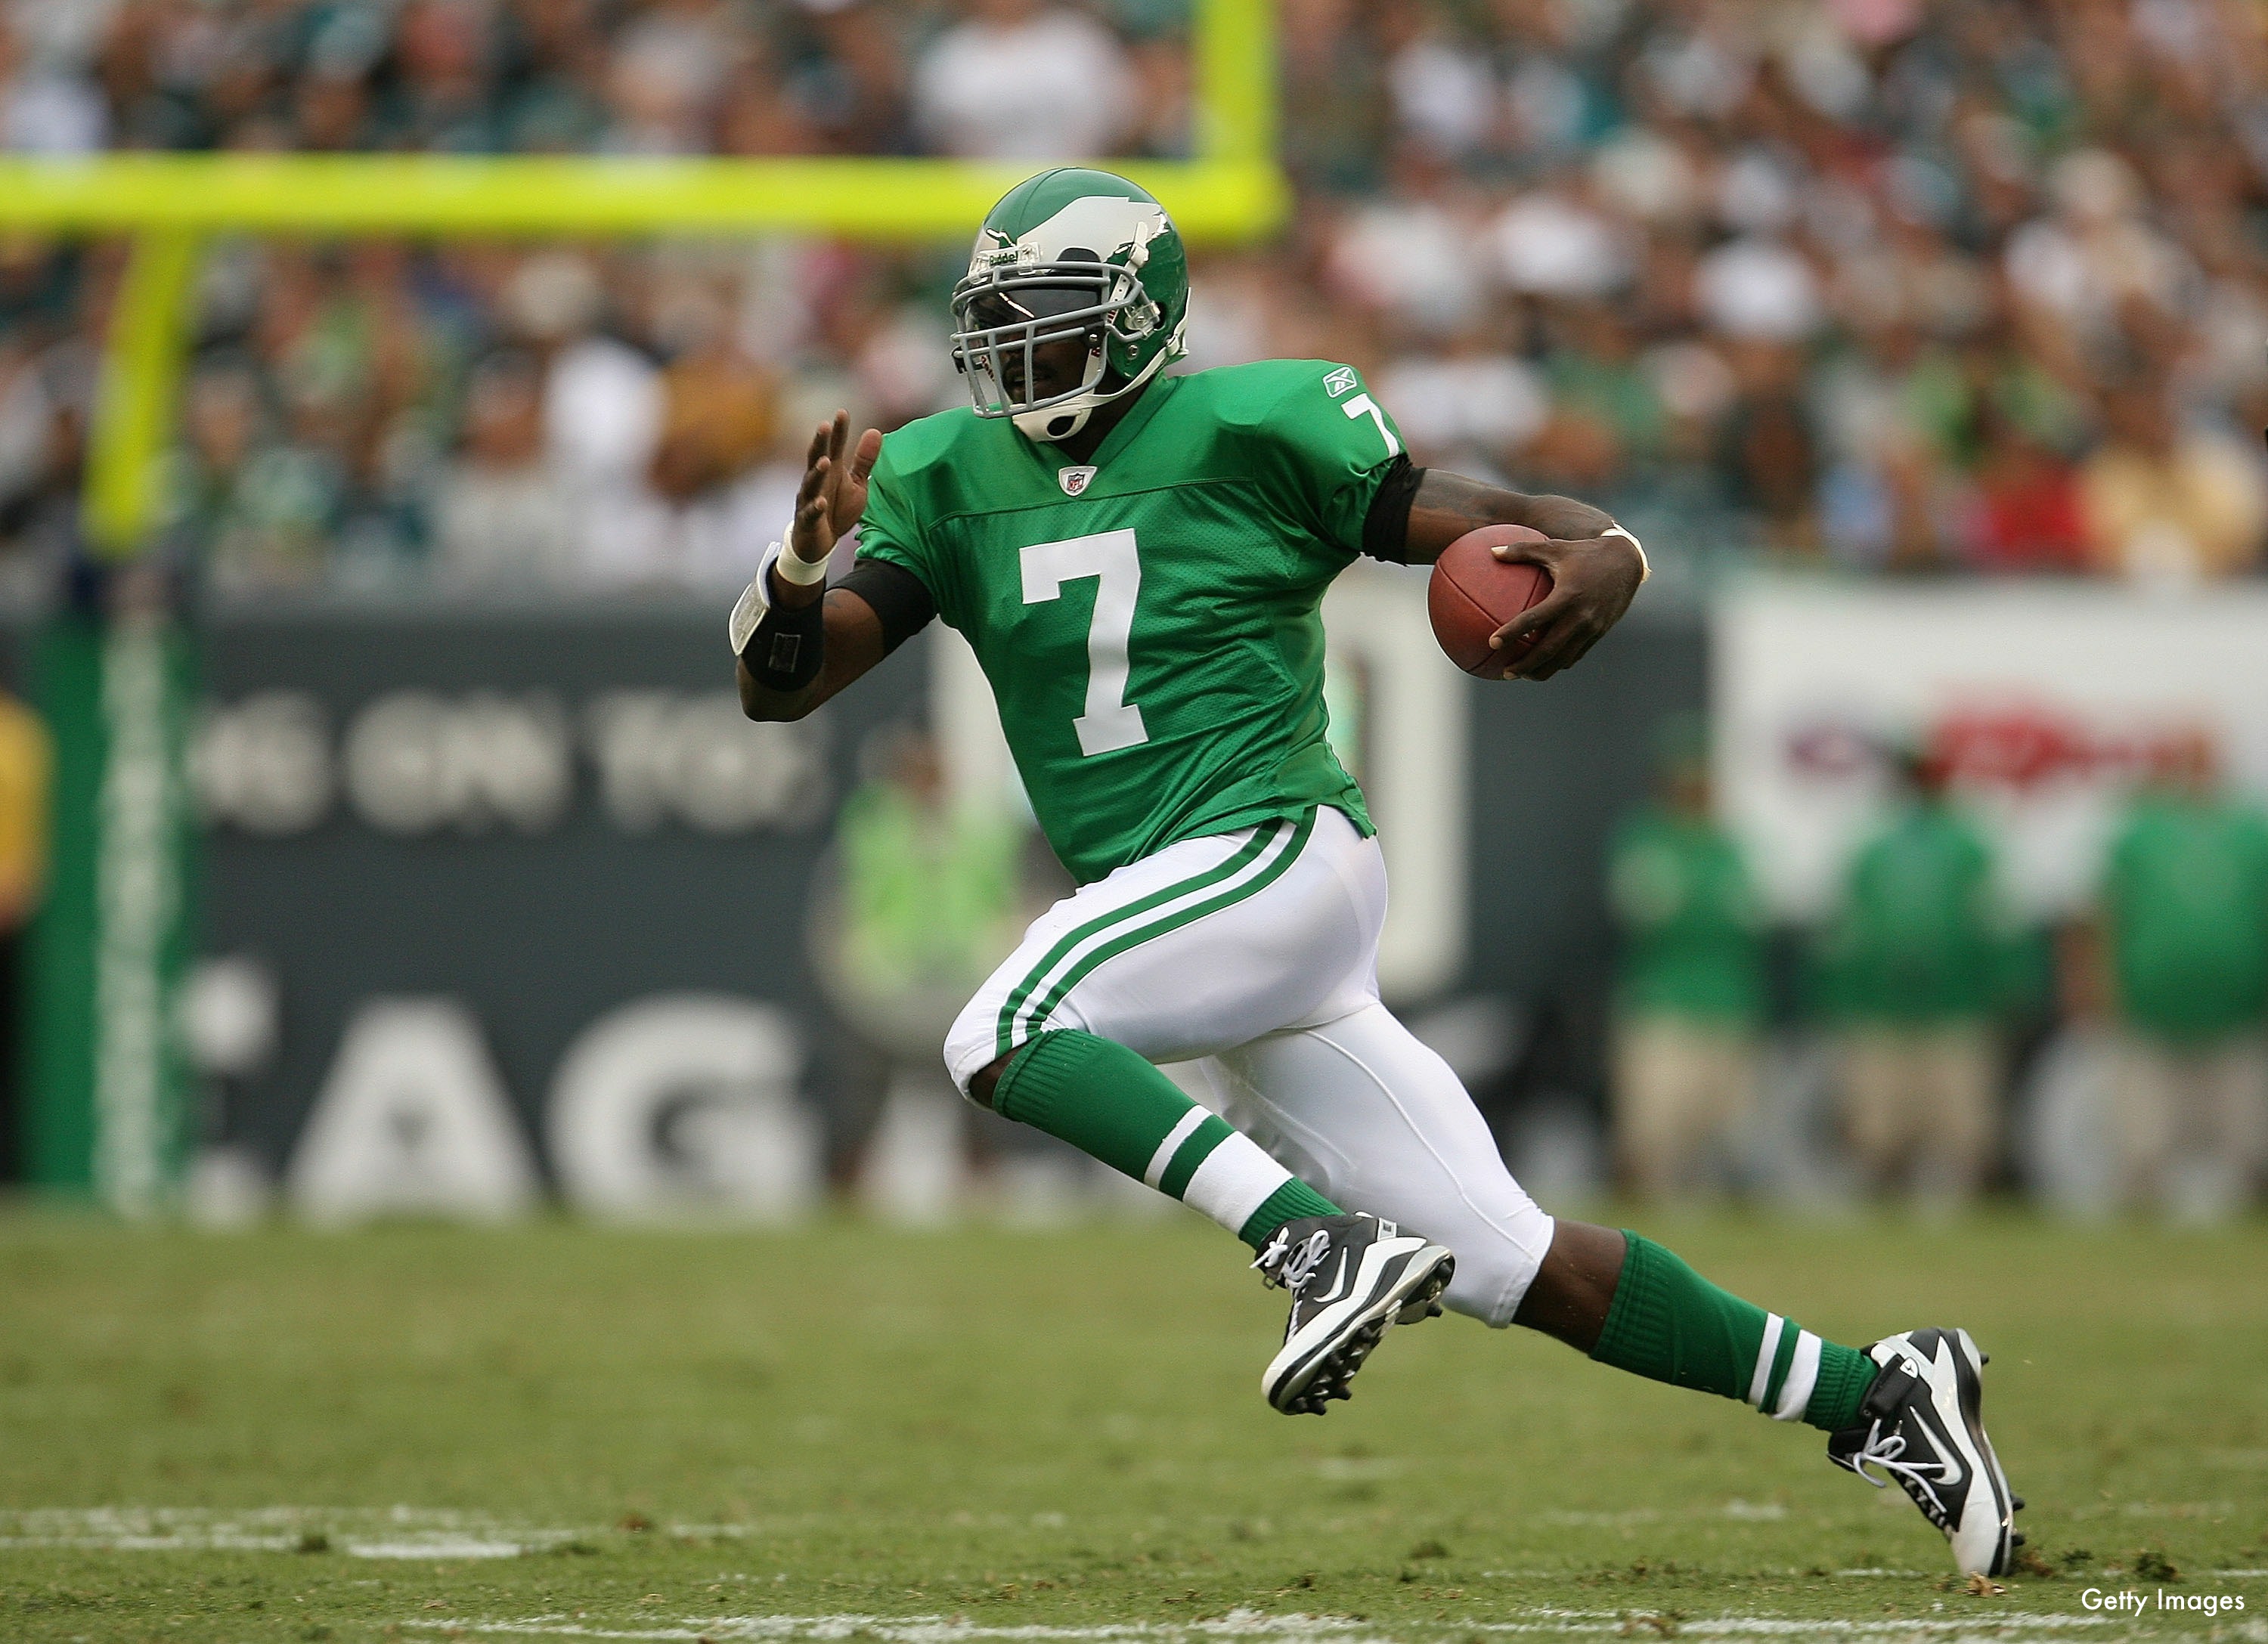 Philadelphia Eagles considering long-overdue switch to kelly green